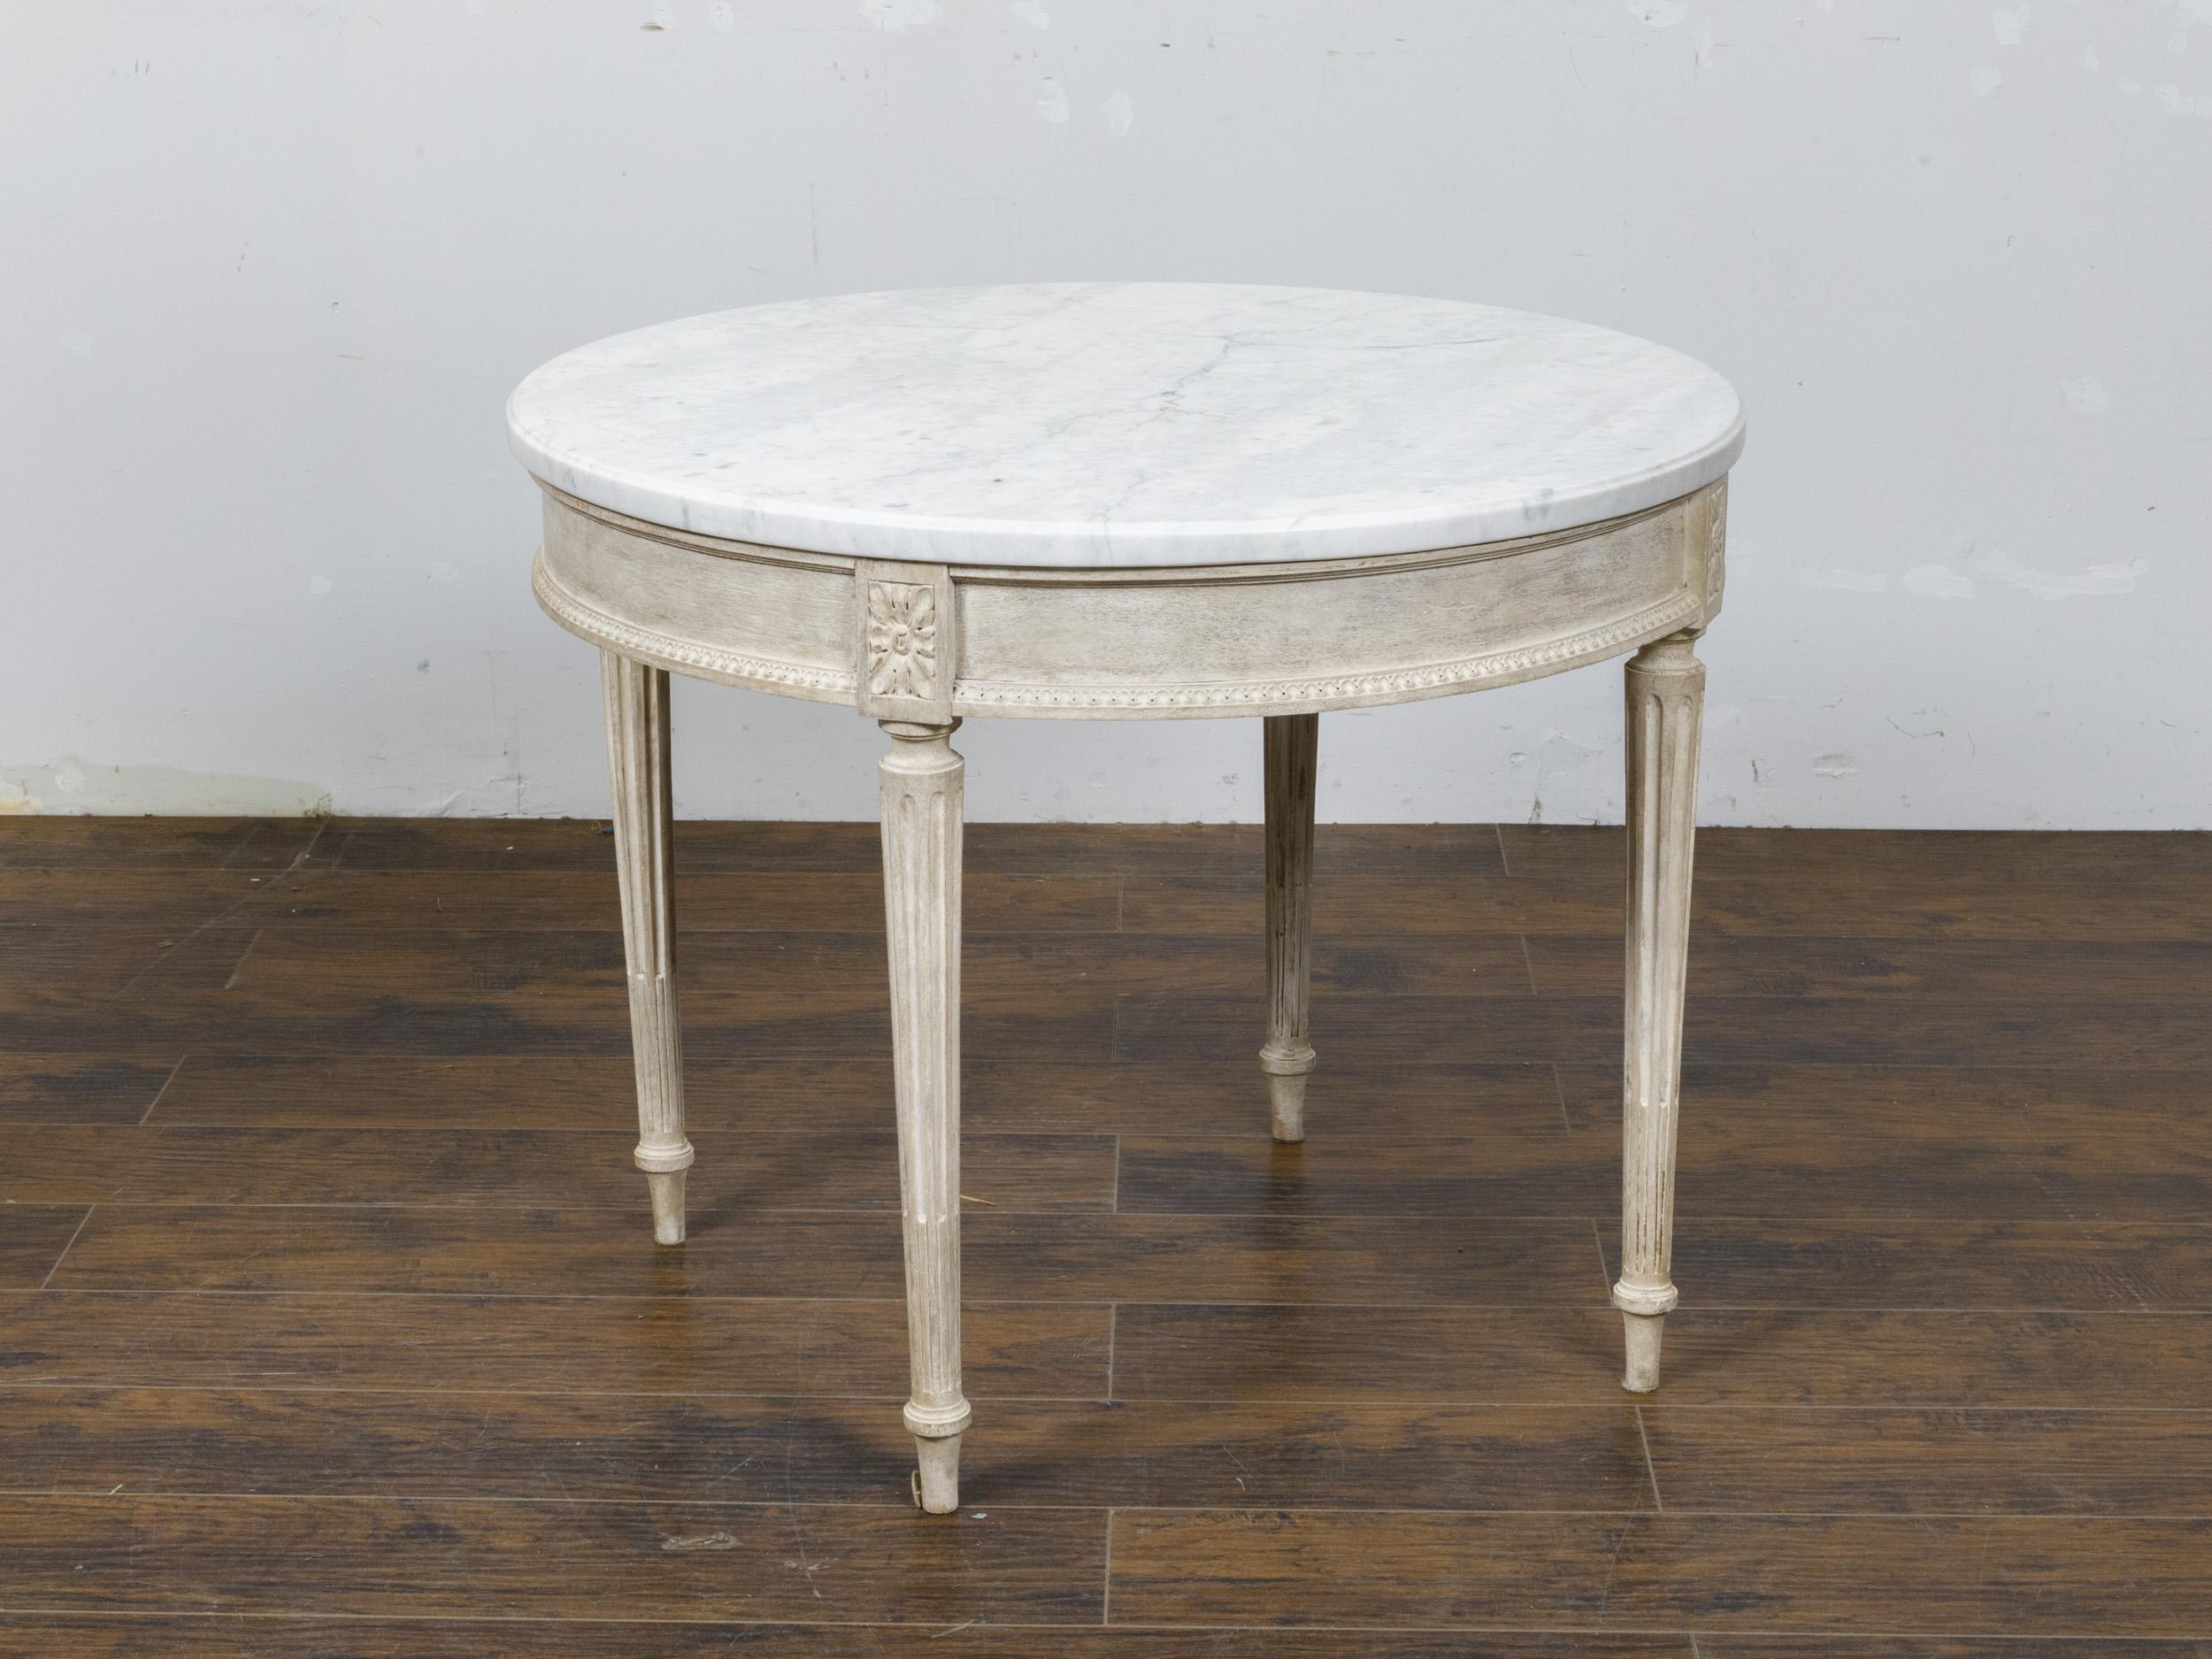 A French Louis XVI style stripped wood center table from the 19th century with circular white veined marble top, fluted legs and carved rosettes. Elevate your living space with this exquisite French Louis XVI style center table from the 19th